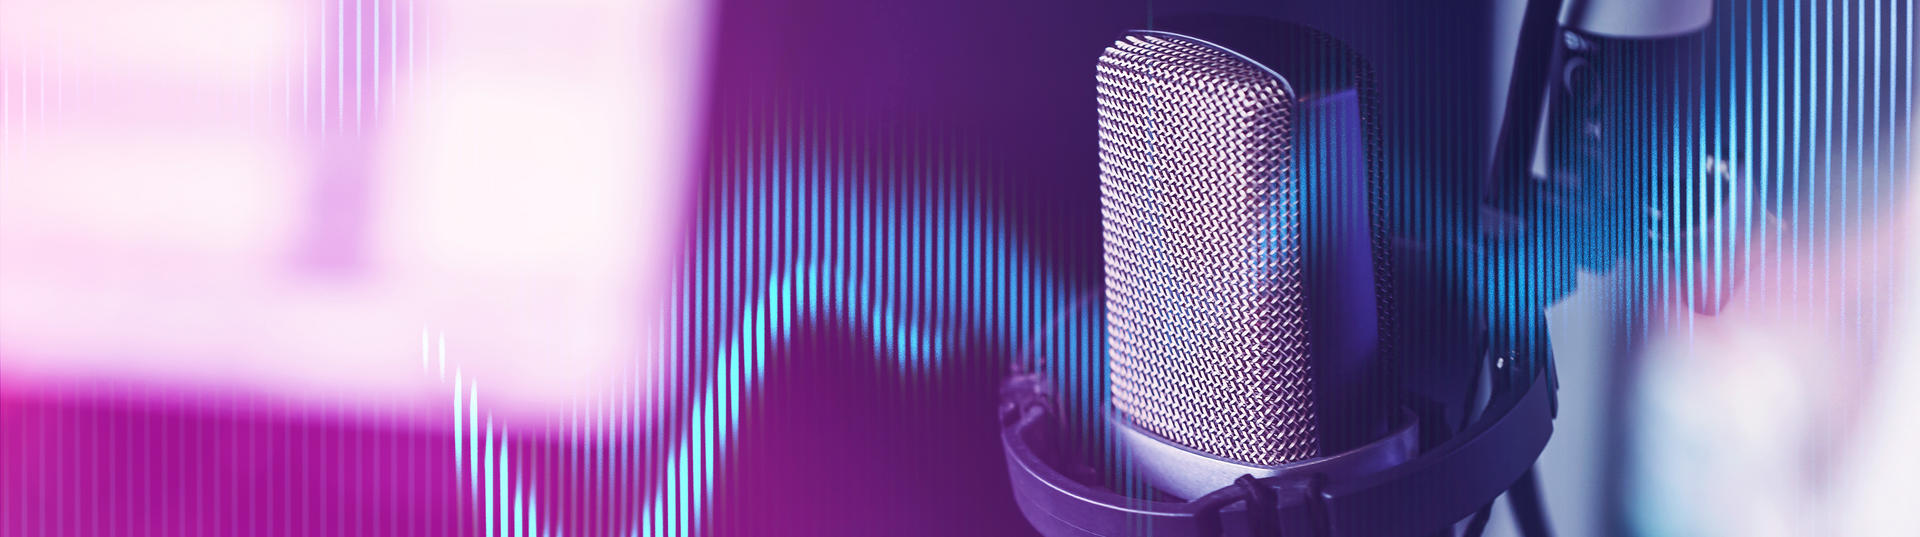 Podcast microphone with sound waves